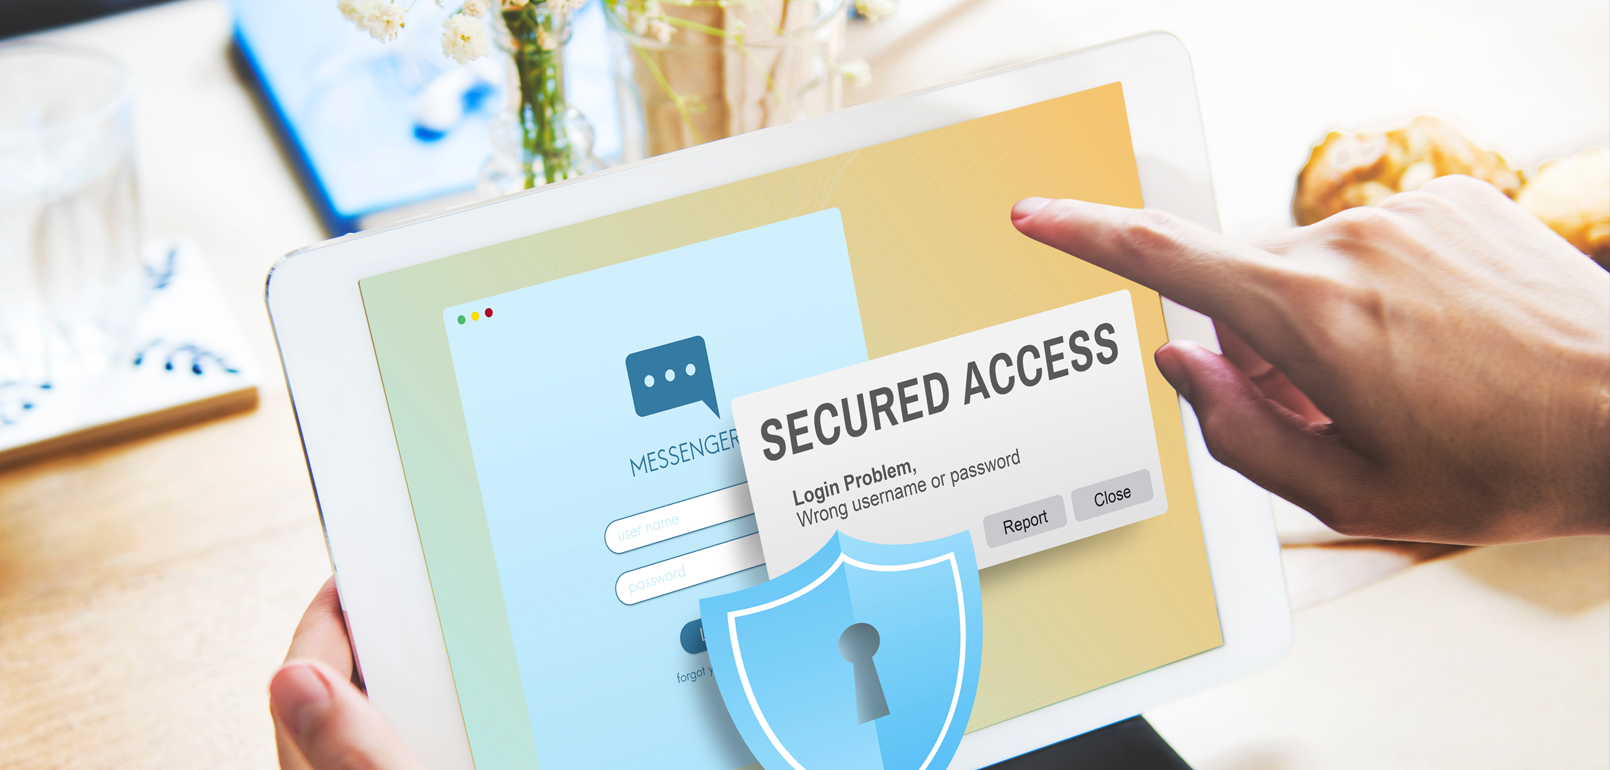 7 best practices to protect your data online